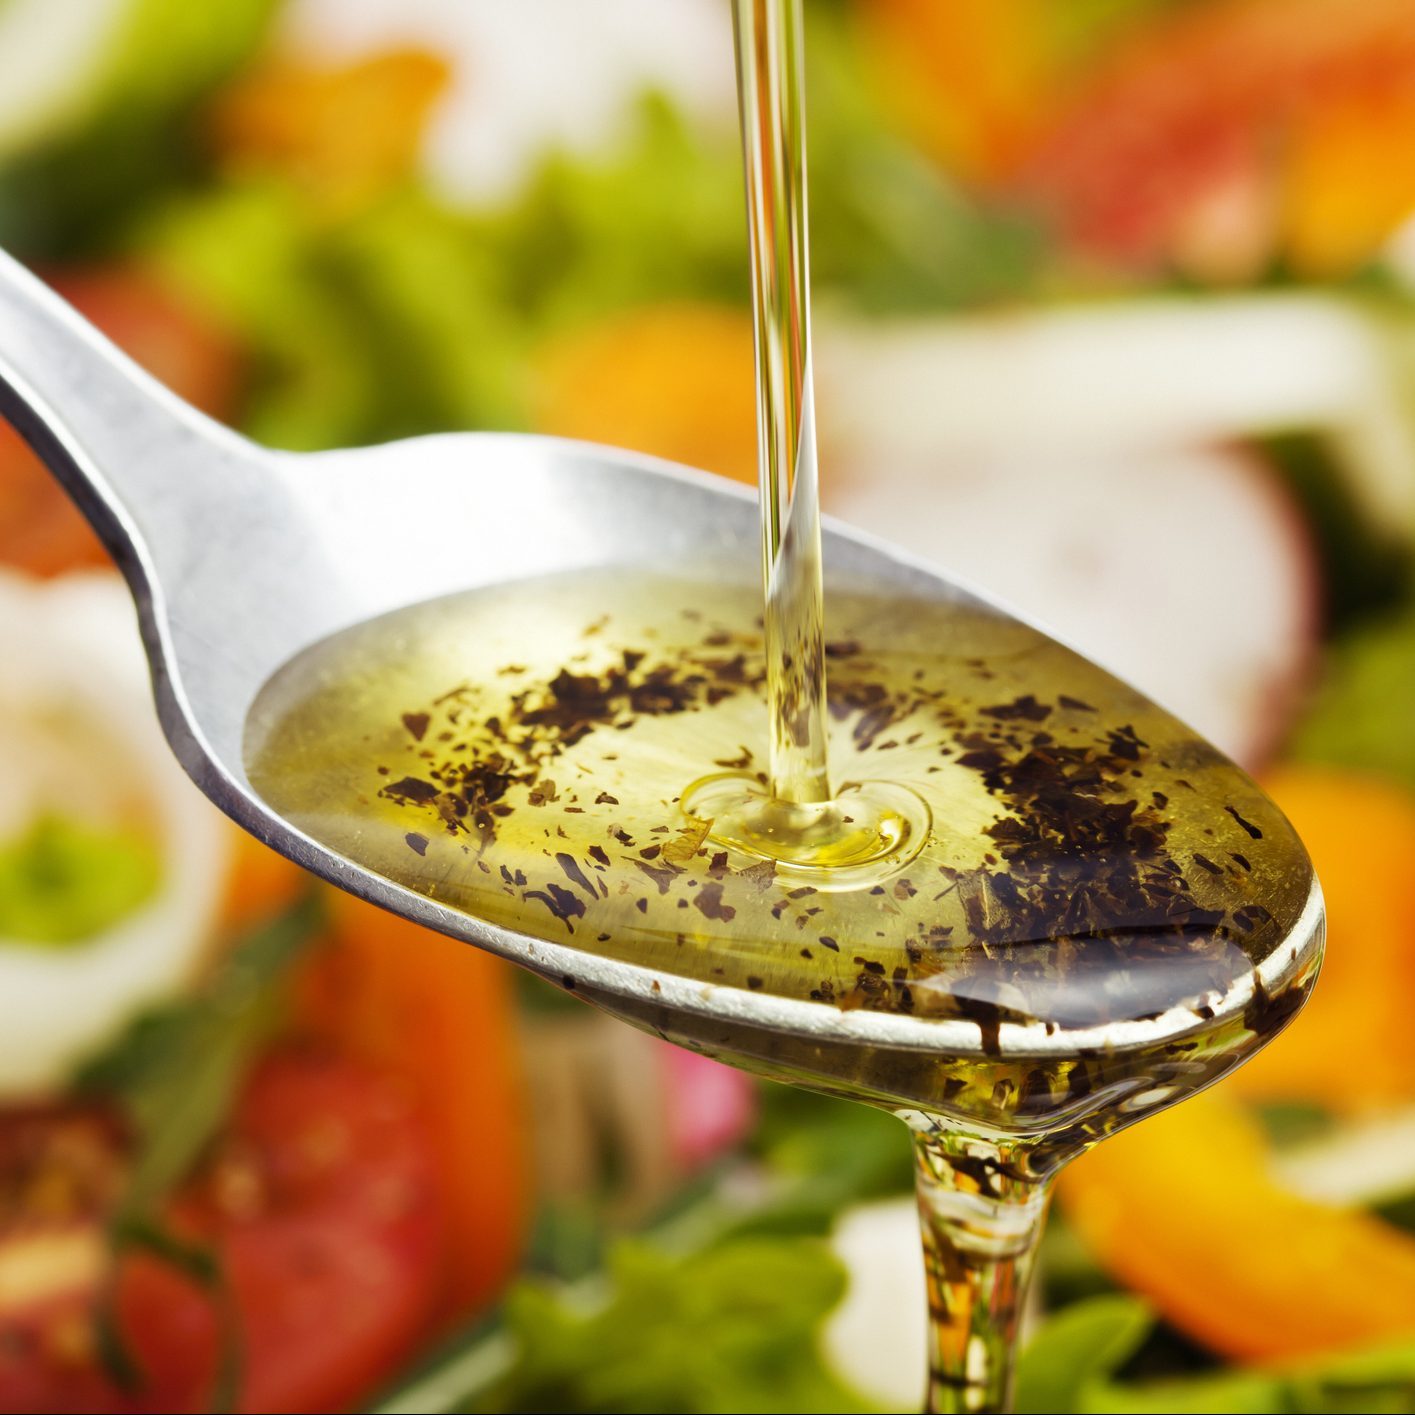 Salad Dressing on a spoon